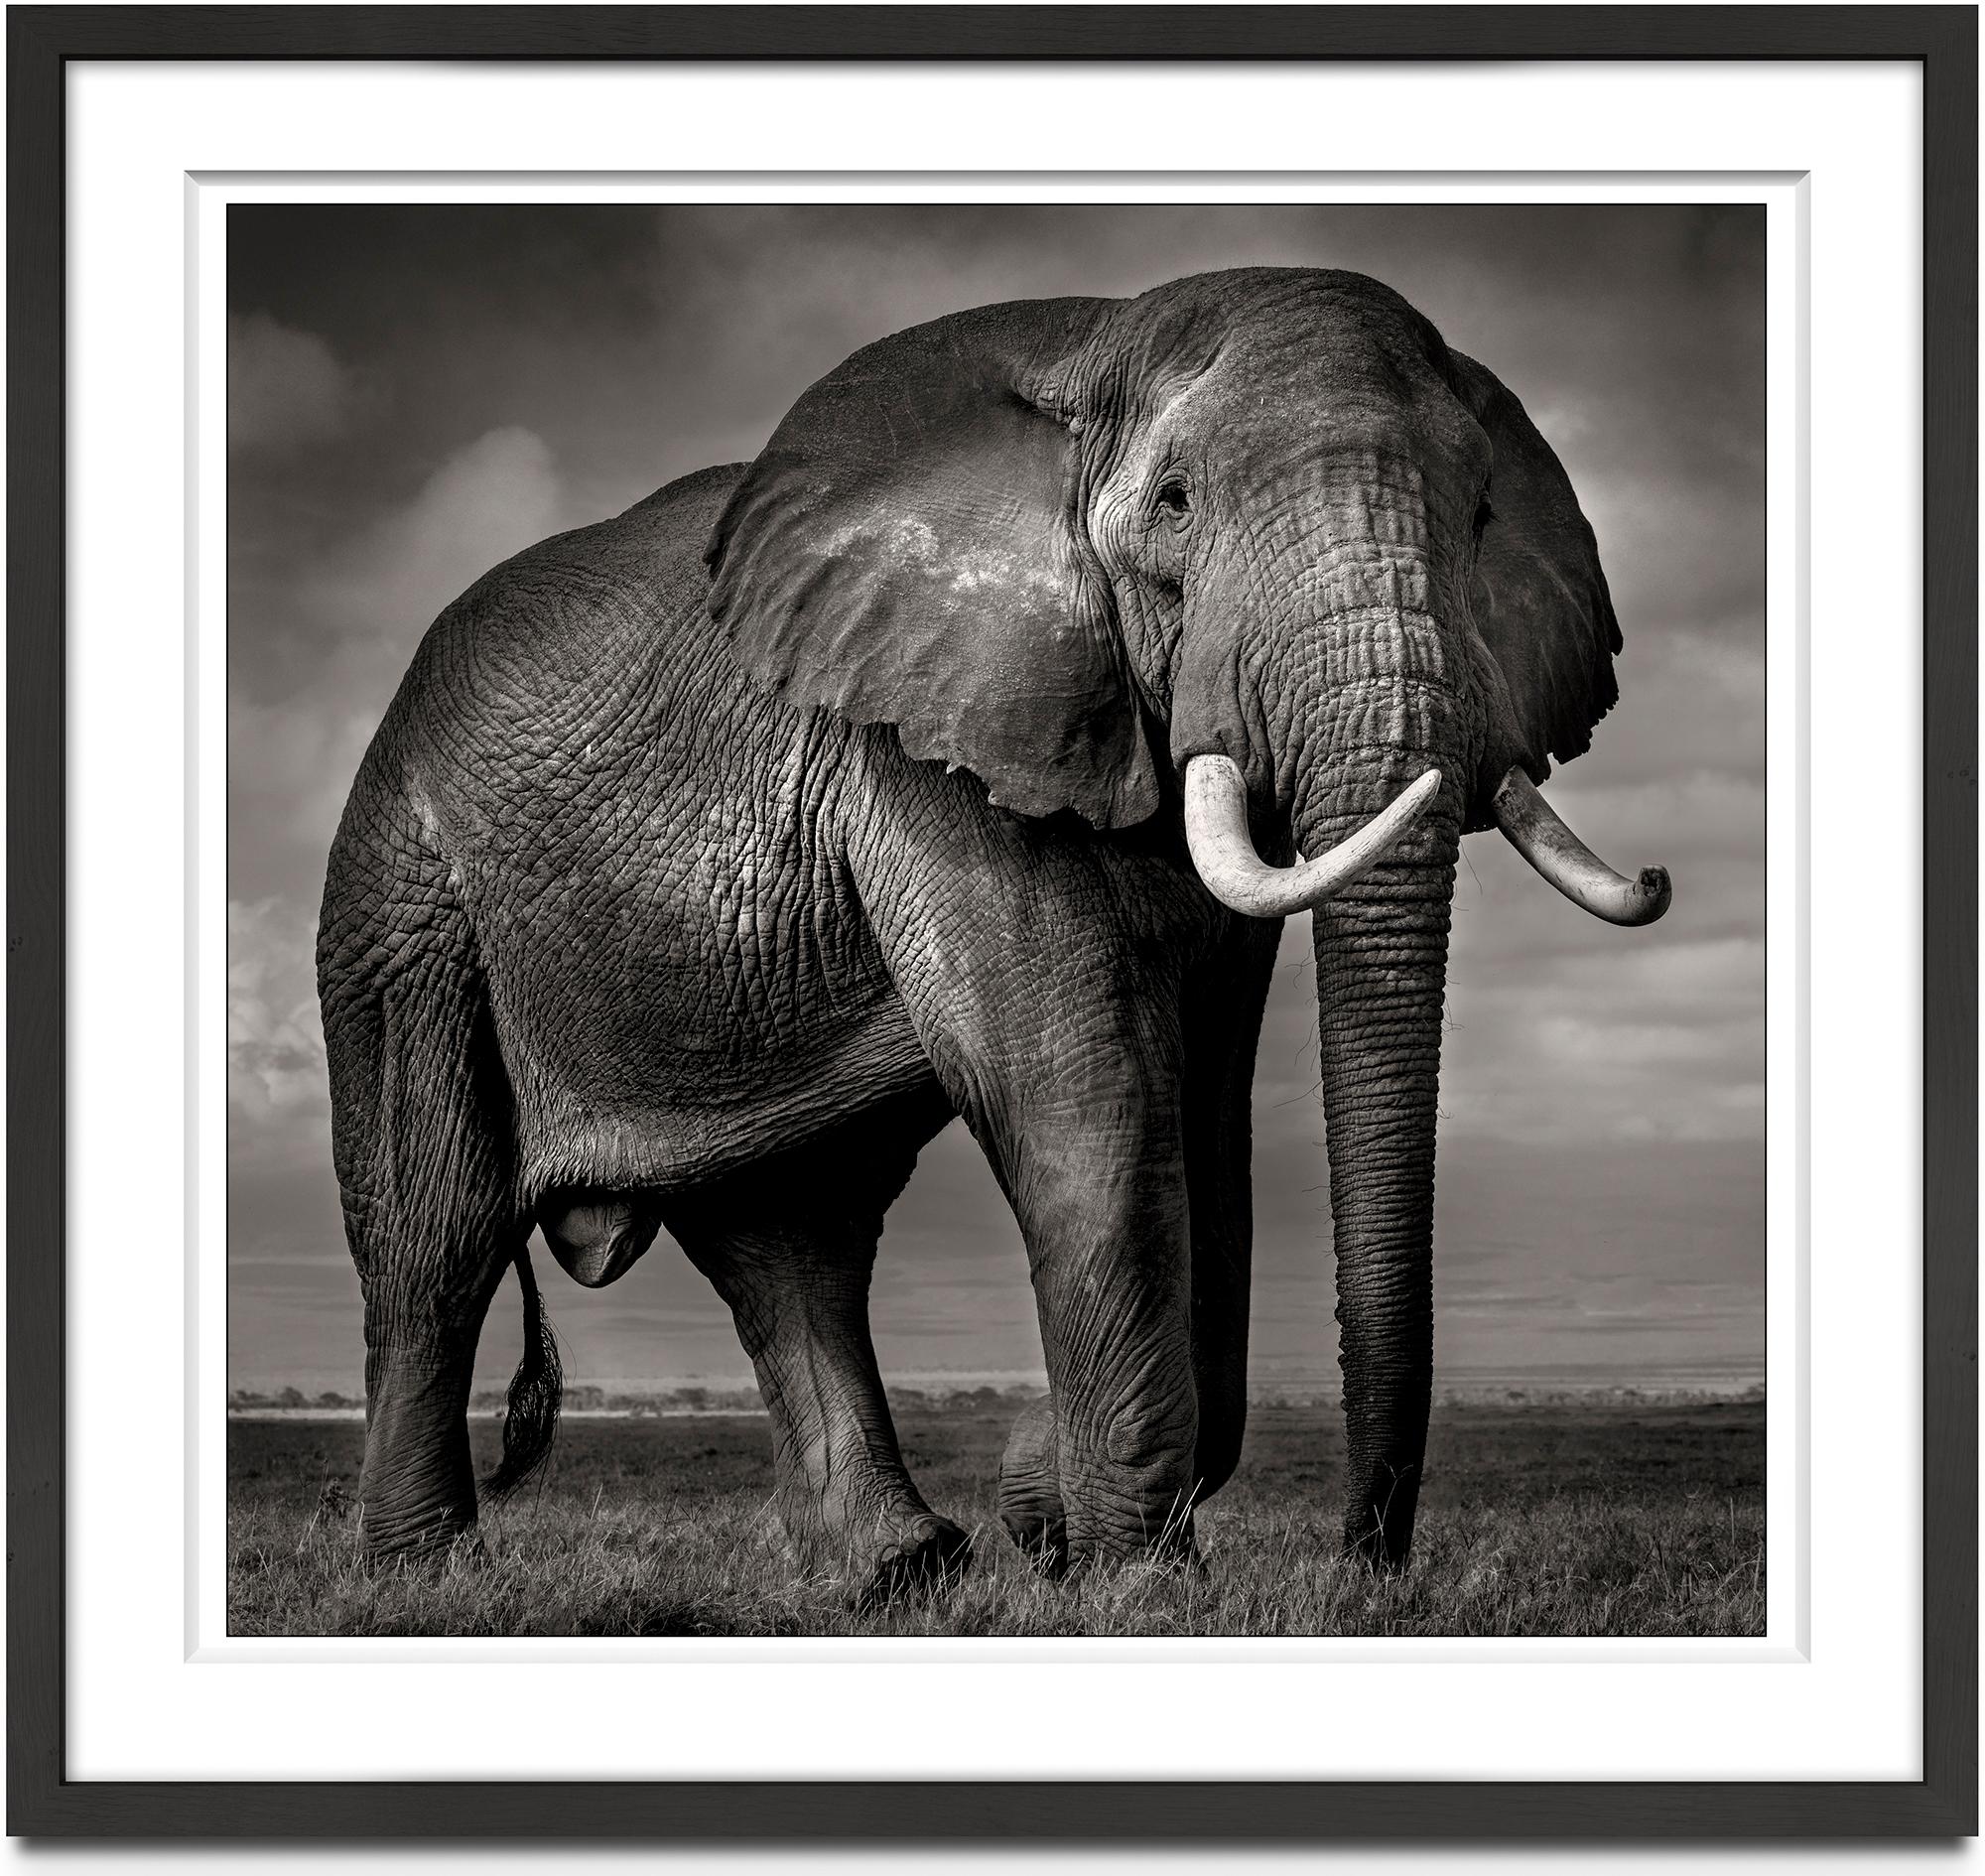 Elephant bull in Amboseli, animal, wildlife, black and white photography, africa - Photograph by Joachim Schmeisser